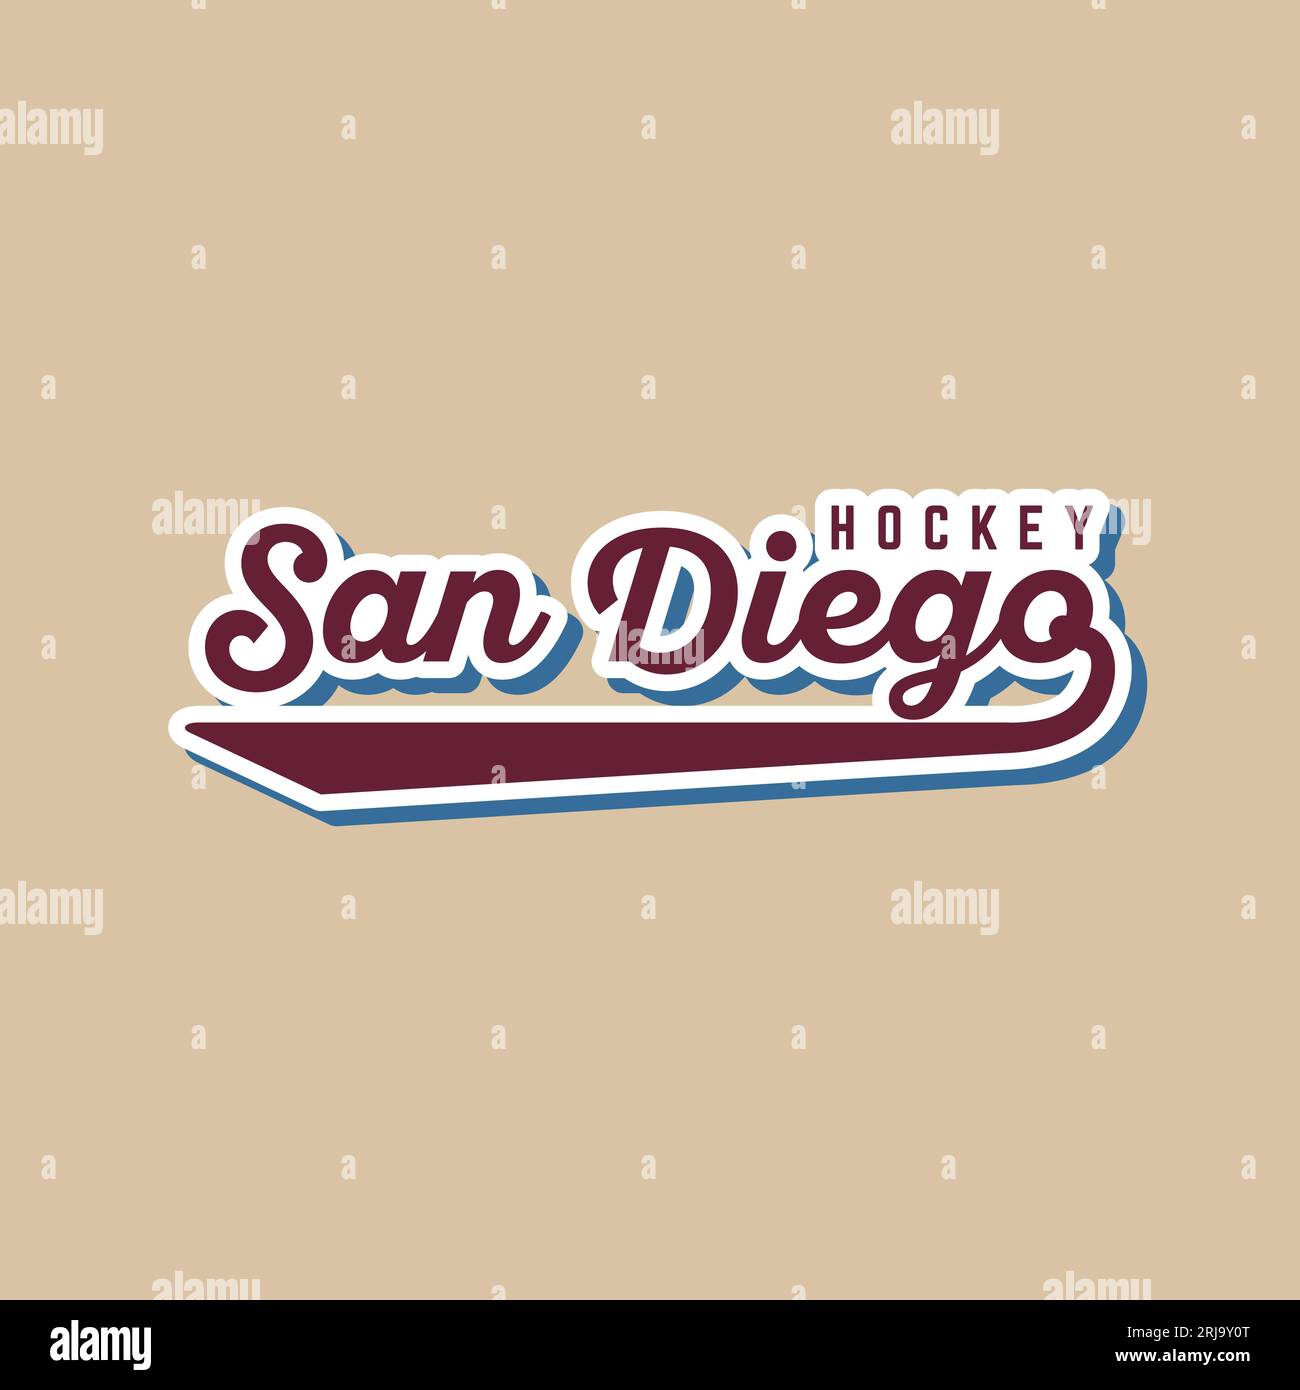 San Diego Typography With Retro Font Style Stock Vector